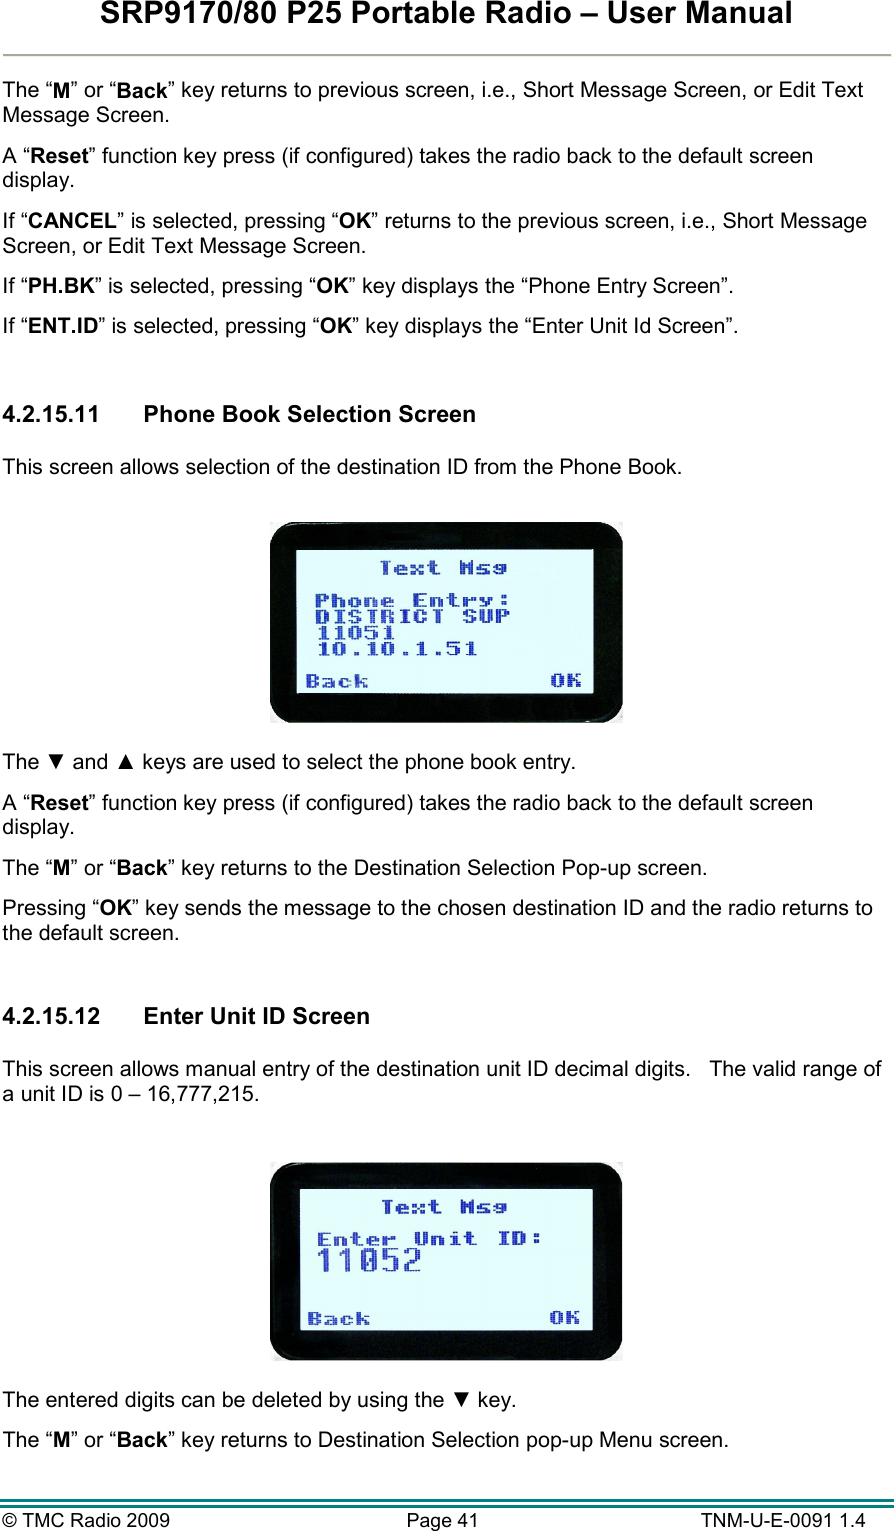 SRP9170/80 P25 Portable Radio – User Manual  © TMC Radio 2009  Page 41   TNM-U-E-0091 1.4 The “M” or “Back” key returns to previous screen, i.e., Short Message Screen, or Edit Text Message Screen. A “Reset” function key press (if configured) takes the radio back to the default screen display. If “CANCEL” is selected, pressing “OK” returns to the previous screen, i.e., Short Message Screen, or Edit Text Message Screen. If “PH.BK” is selected, pressing “OK” key displays the “Phone Entry Screen”. If “ENT.ID” is selected, pressing “OK” key displays the “Enter Unit Id Screen”.  4.2.15.11  Phone Book Selection Screen  This screen allows selection of the destination ID from the Phone Book.    The ▼ and ▲ keys are used to select the phone book entry.  A “Reset” function key press (if configured) takes the radio back to the default screen display. The “M” or “Back” key returns to the Destination Selection Pop-up screen. Pressing “OK” key sends the message to the chosen destination ID and the radio returns to the default screen.  4.2.15.12  Enter Unit ID Screen  This screen allows manual entry of the destination unit ID decimal digits.   The valid range of a unit ID is 0 – 16,777,215.    The entered digits can be deleted by using the ▼ key. The “M” or “Back” key returns to Destination Selection pop-up Menu screen. 